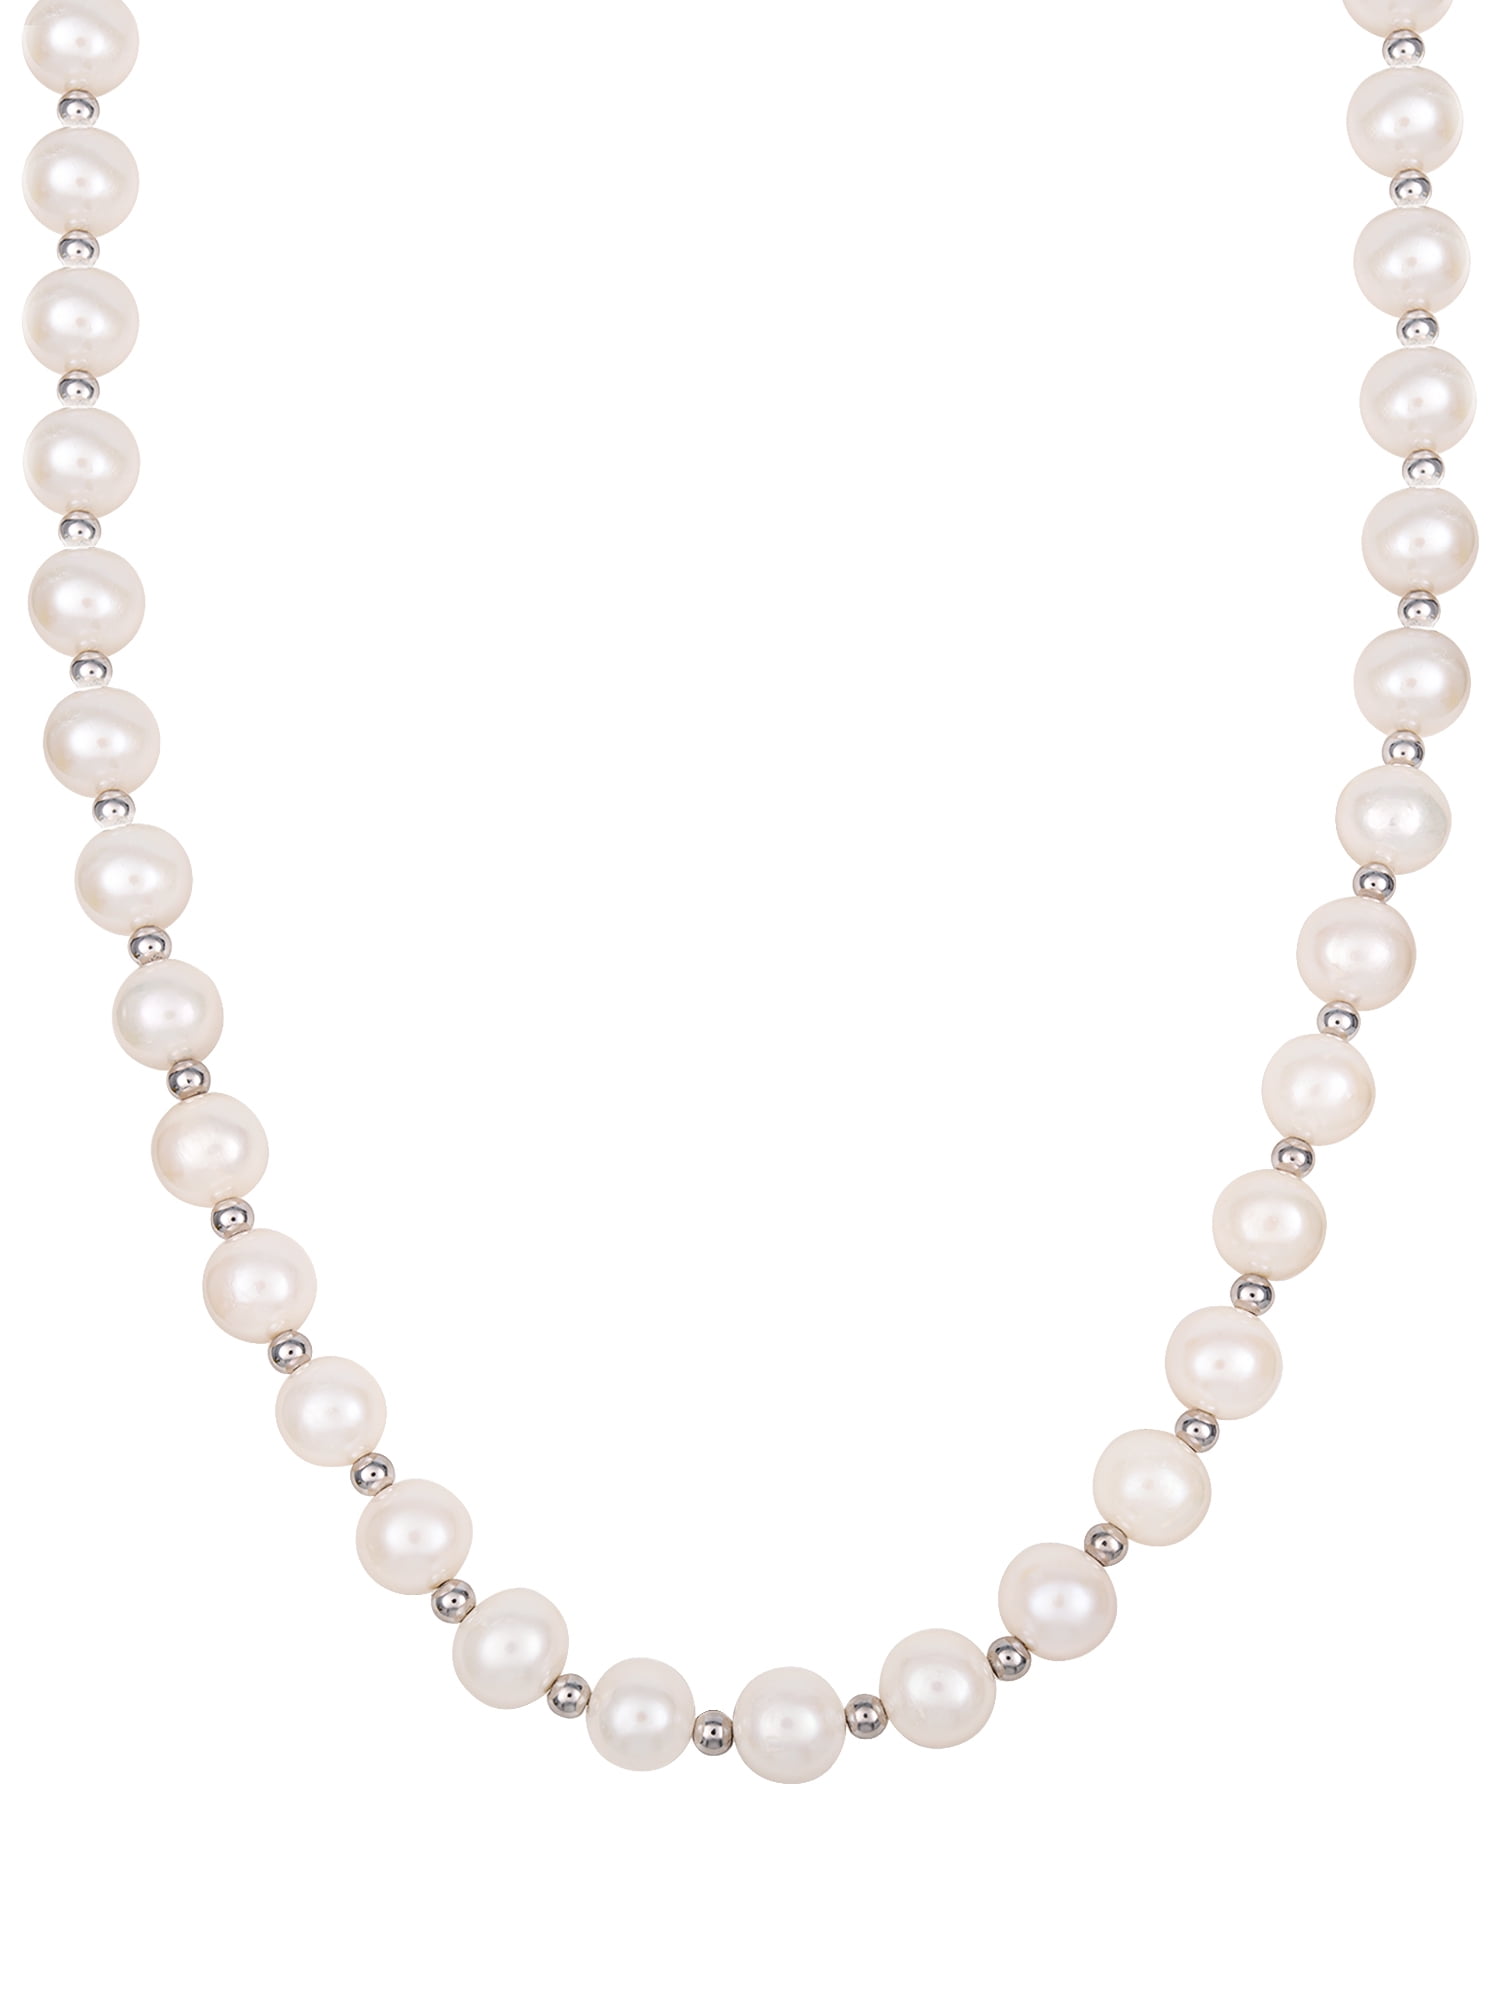 Natural 7-8mm 3 Row AAA White Cultured Pearl Necklace 20-22 Inch 